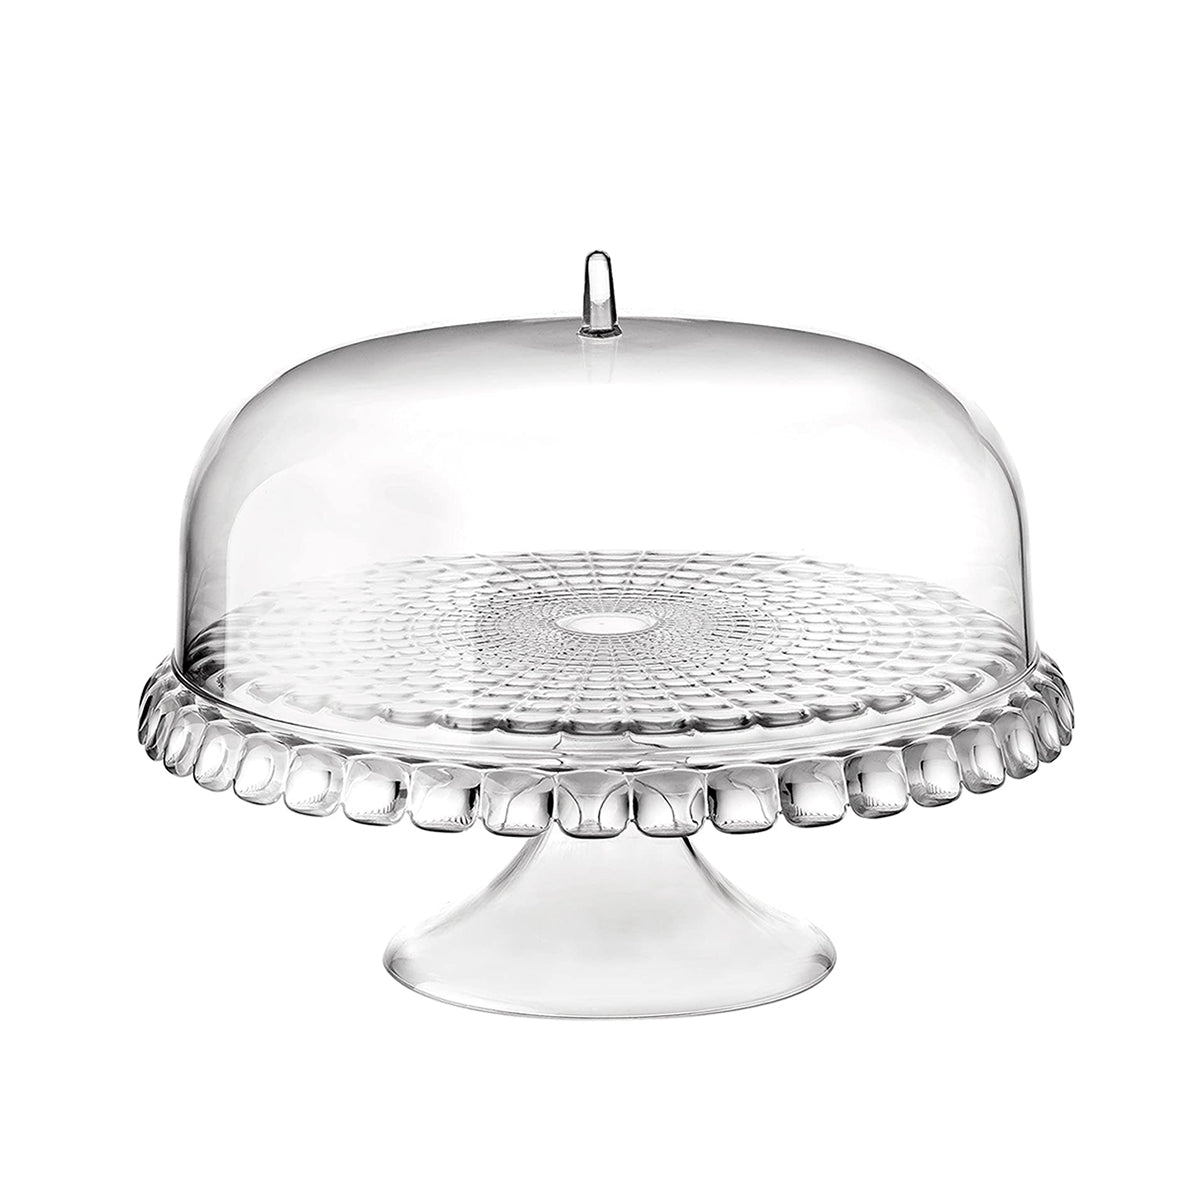 Tiffany Small Cake Stand With Dome Clear